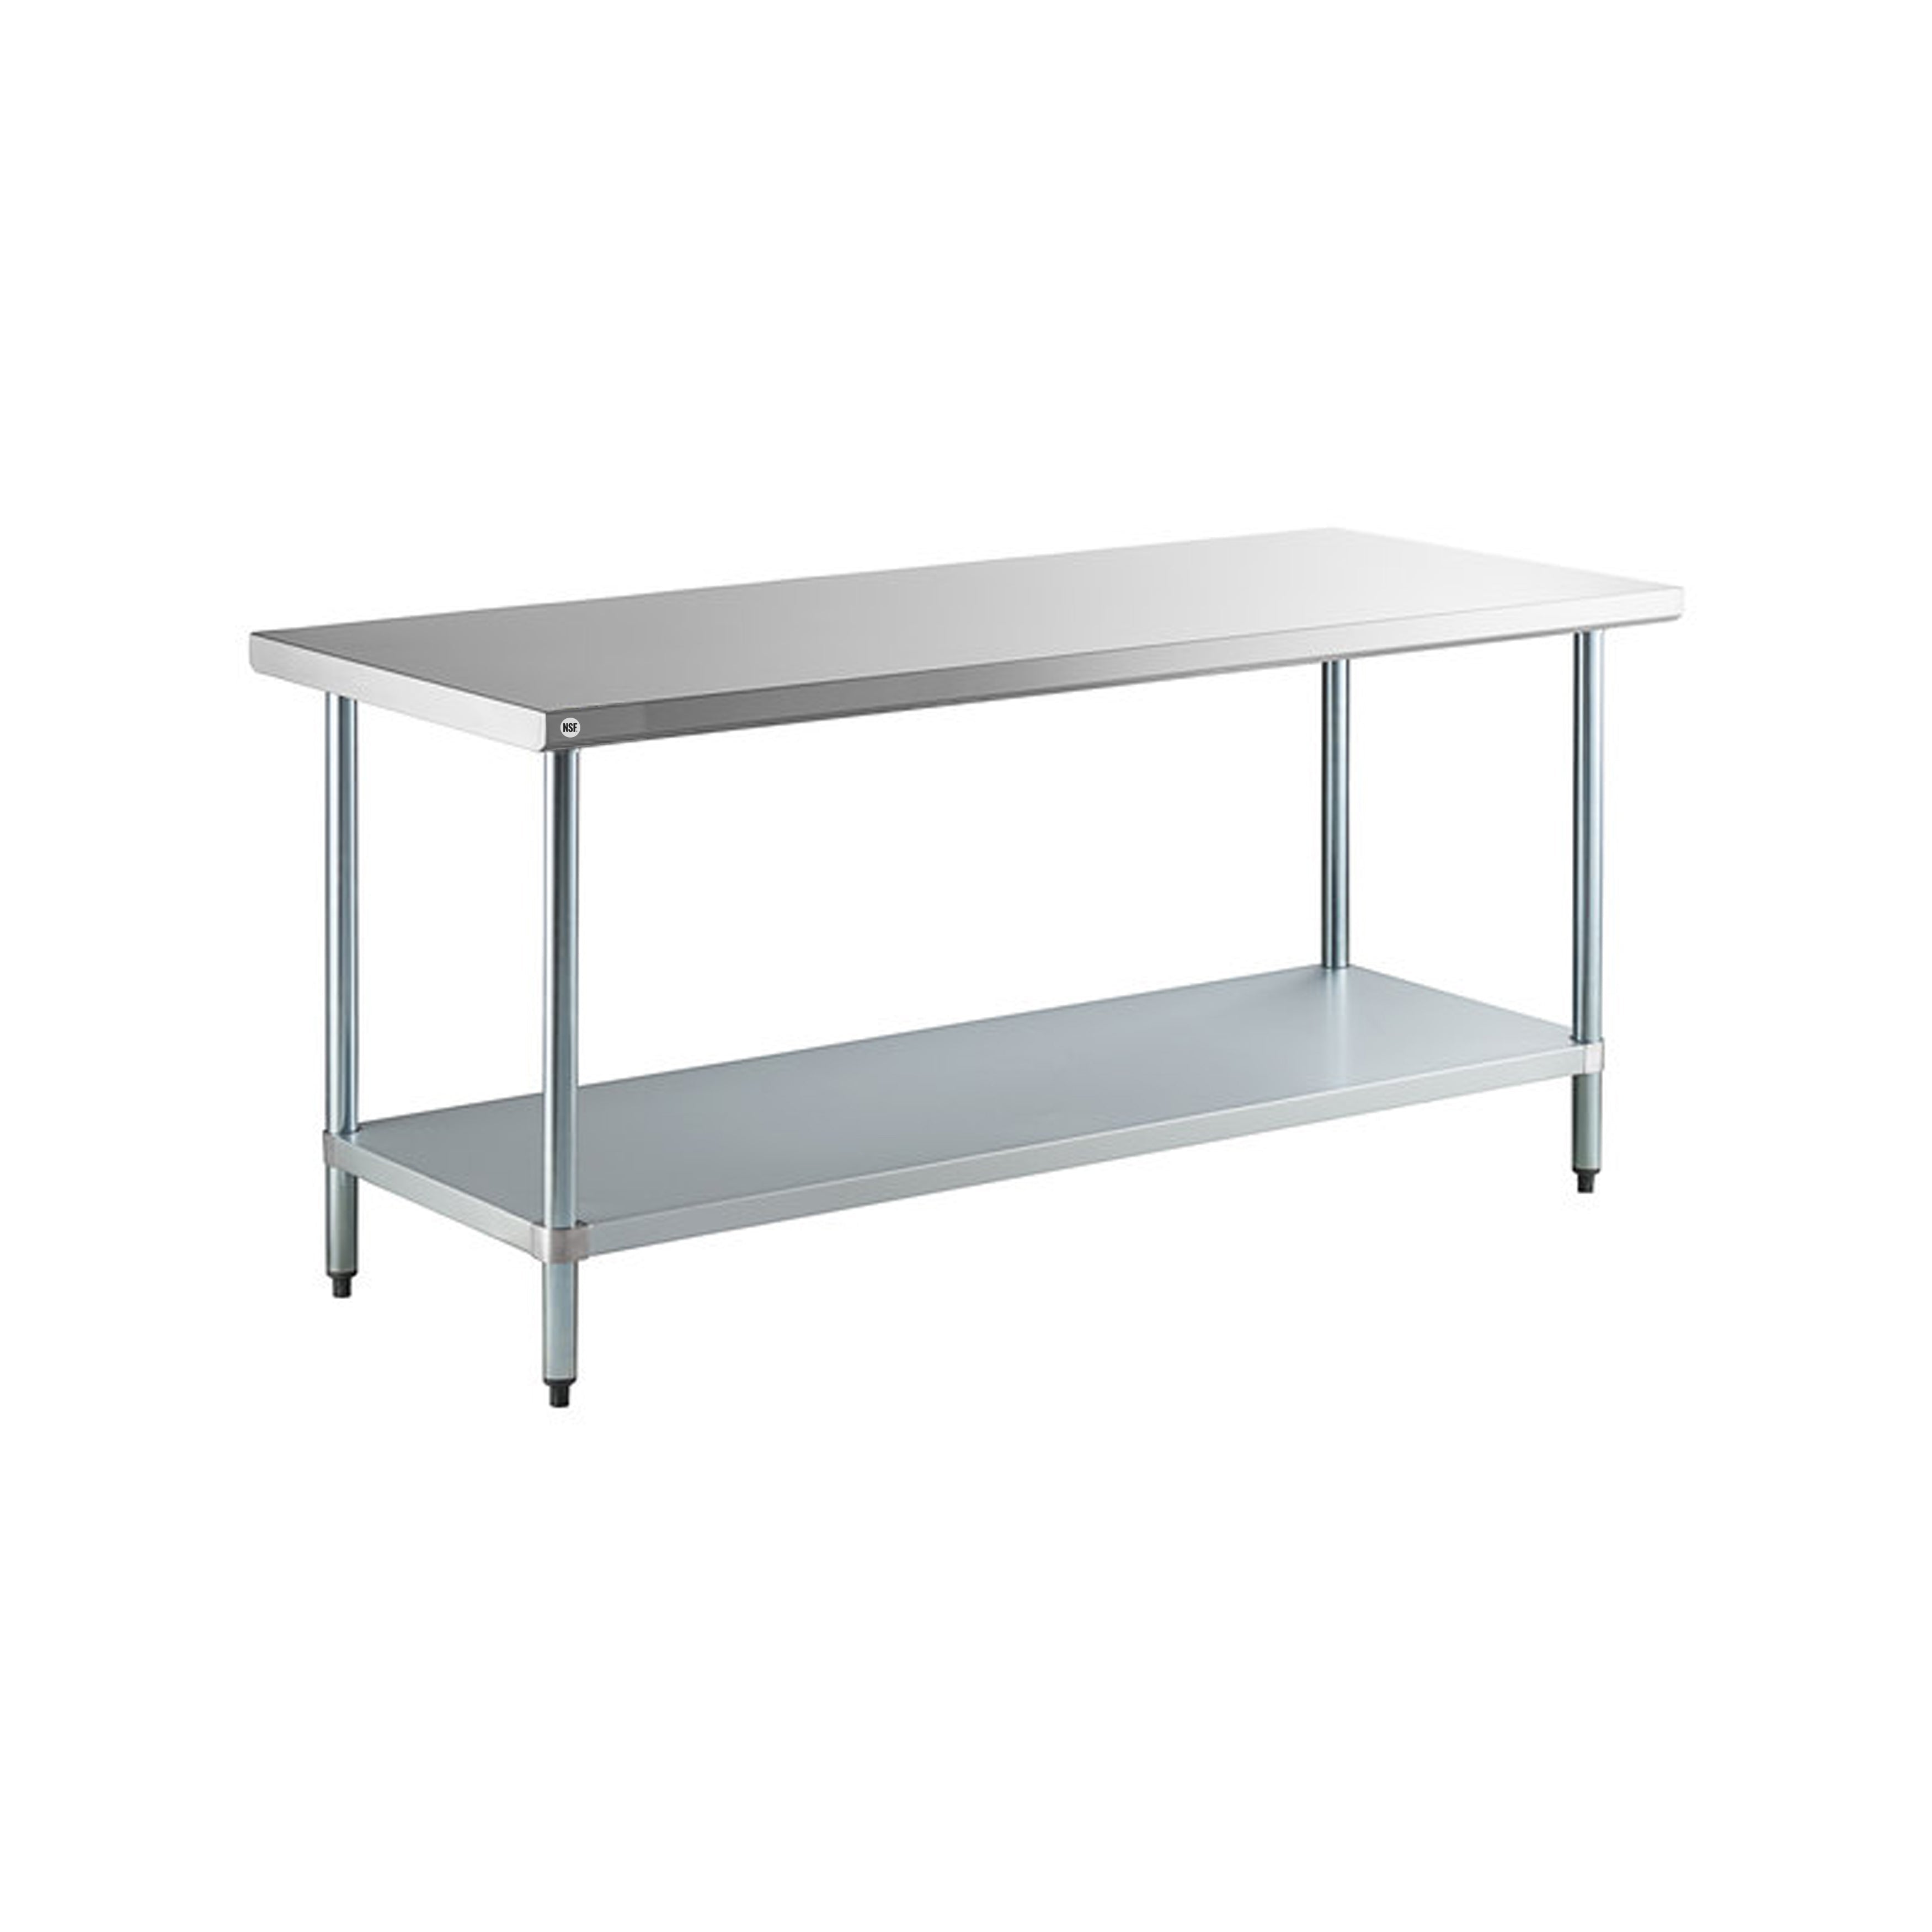 Omcan - 19136, Commercial 24" x 30" Stainless Steel Kitchen Work Table 800lbs Heavy Duty